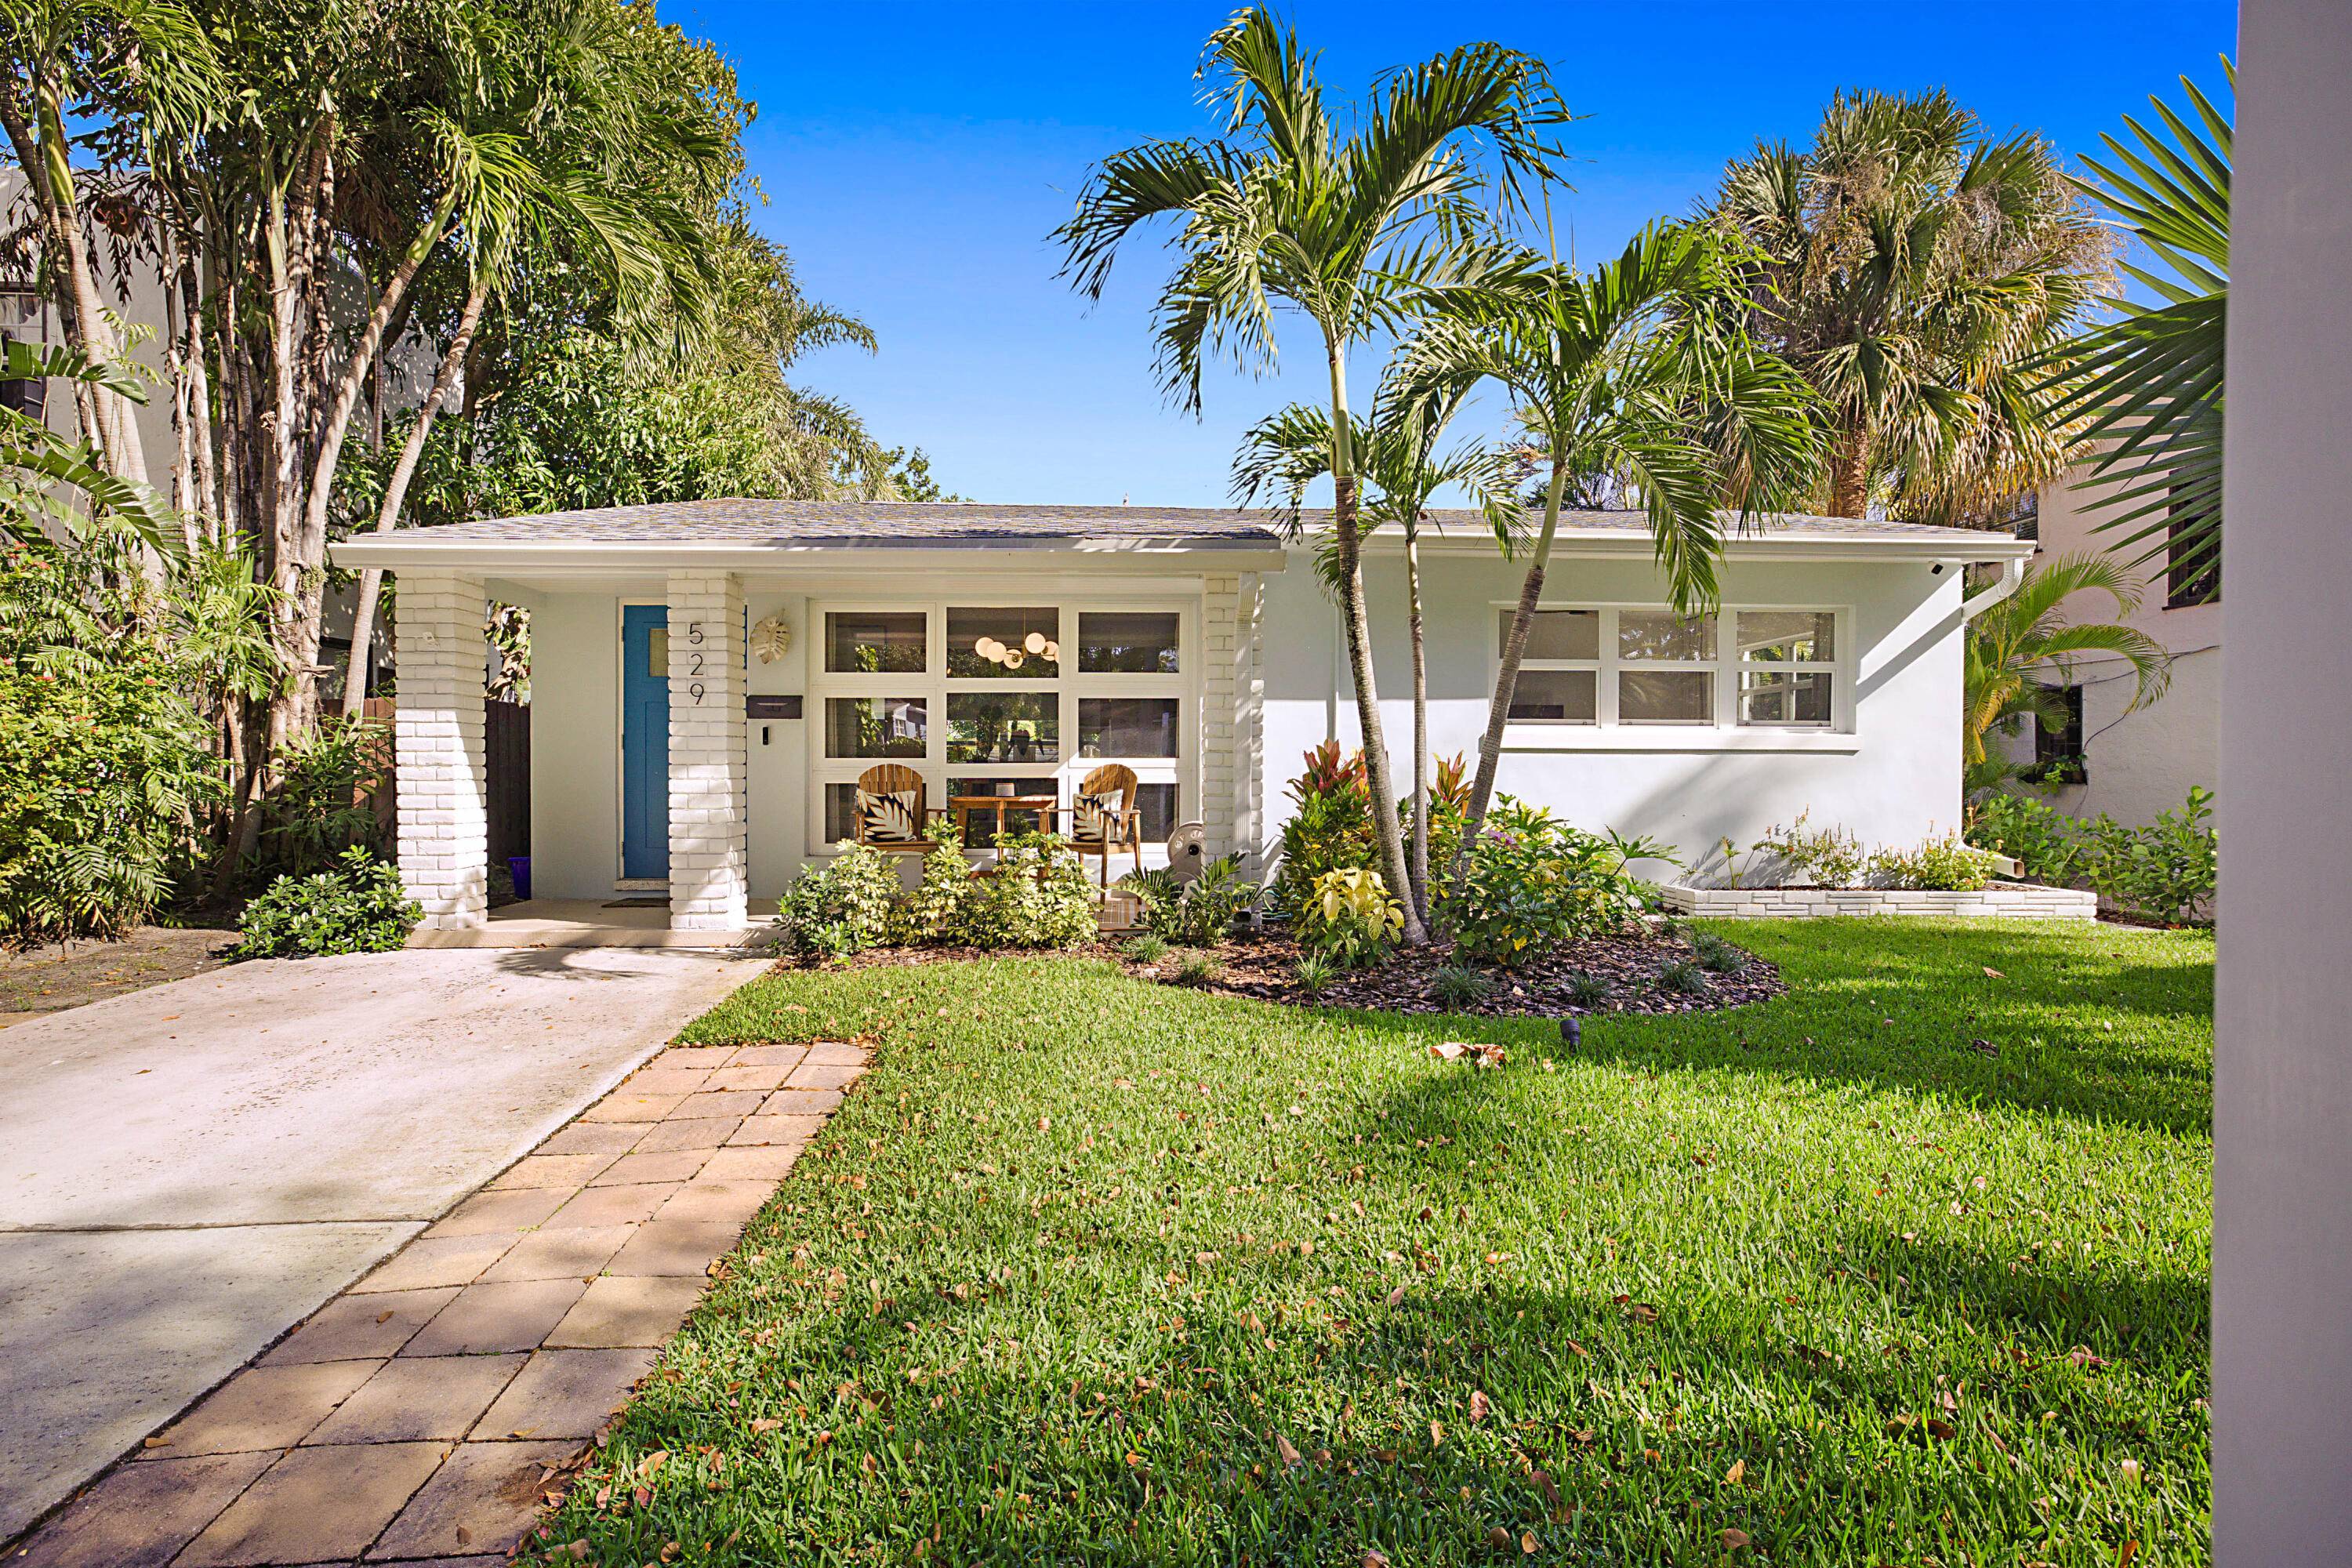 Welcome to a charming renovated midcentury bungalow in coveted Old Historic Northwood.